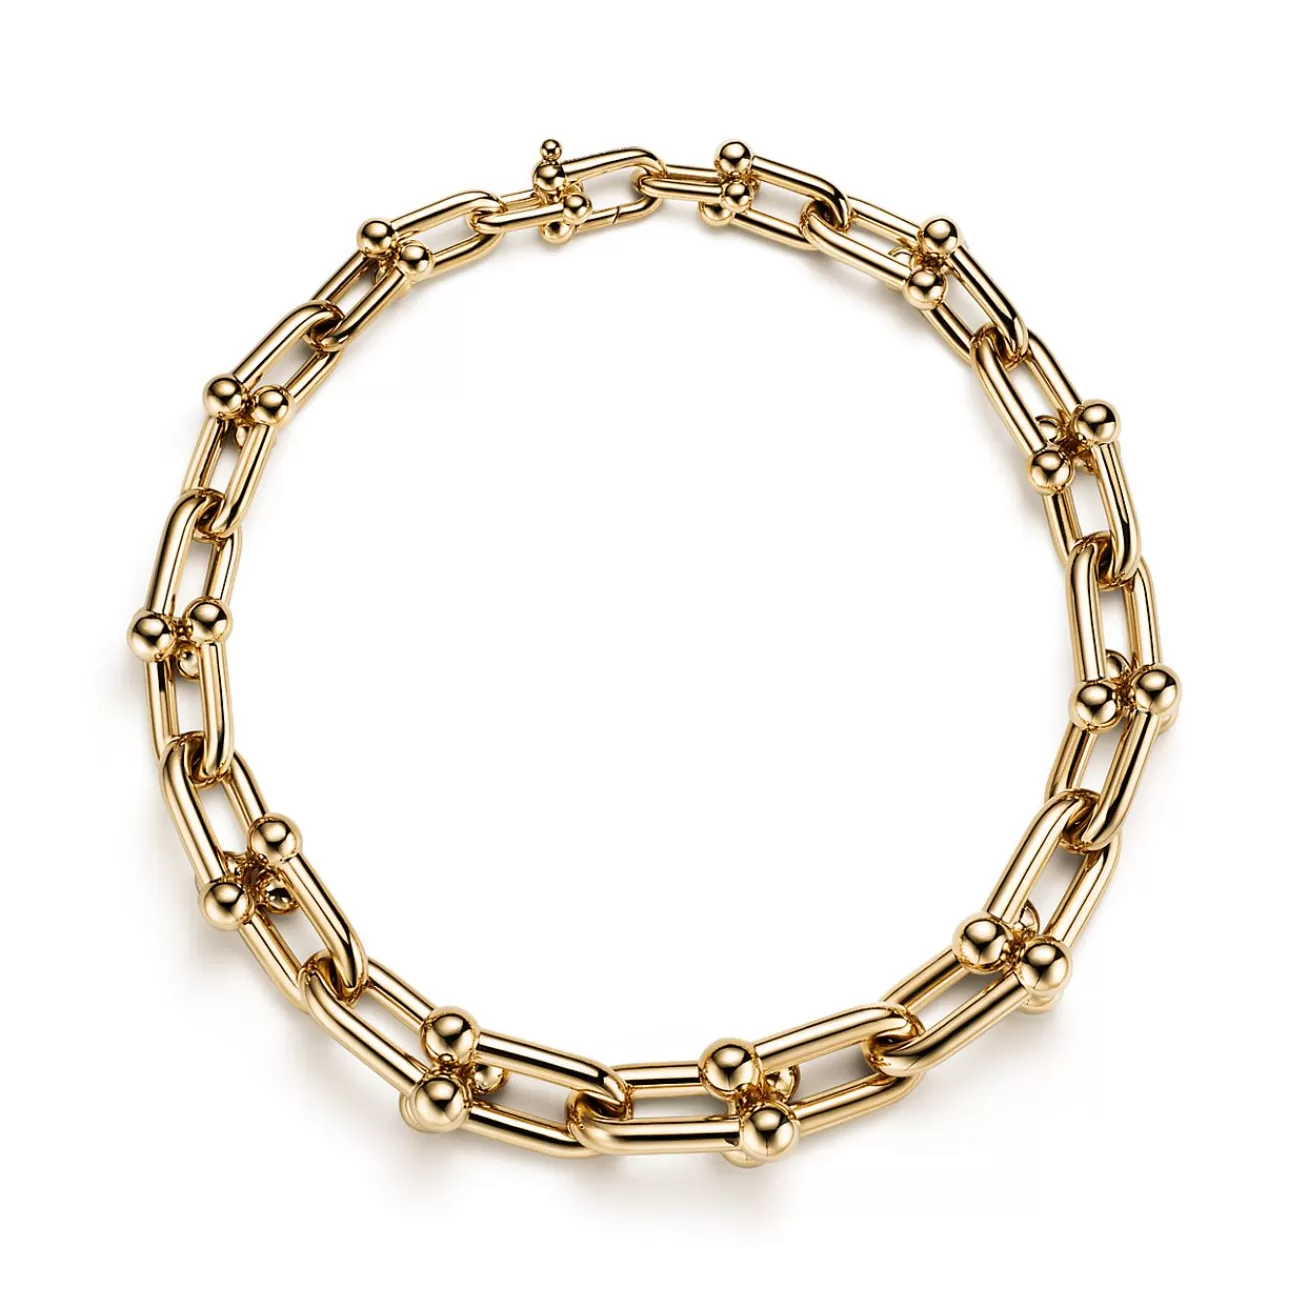 Tiffany & Co. Tiffany HardWear Bold Graduated Link Necklace in Yellow Gold | ^ Necklaces & Pendants | Gold Jewelry